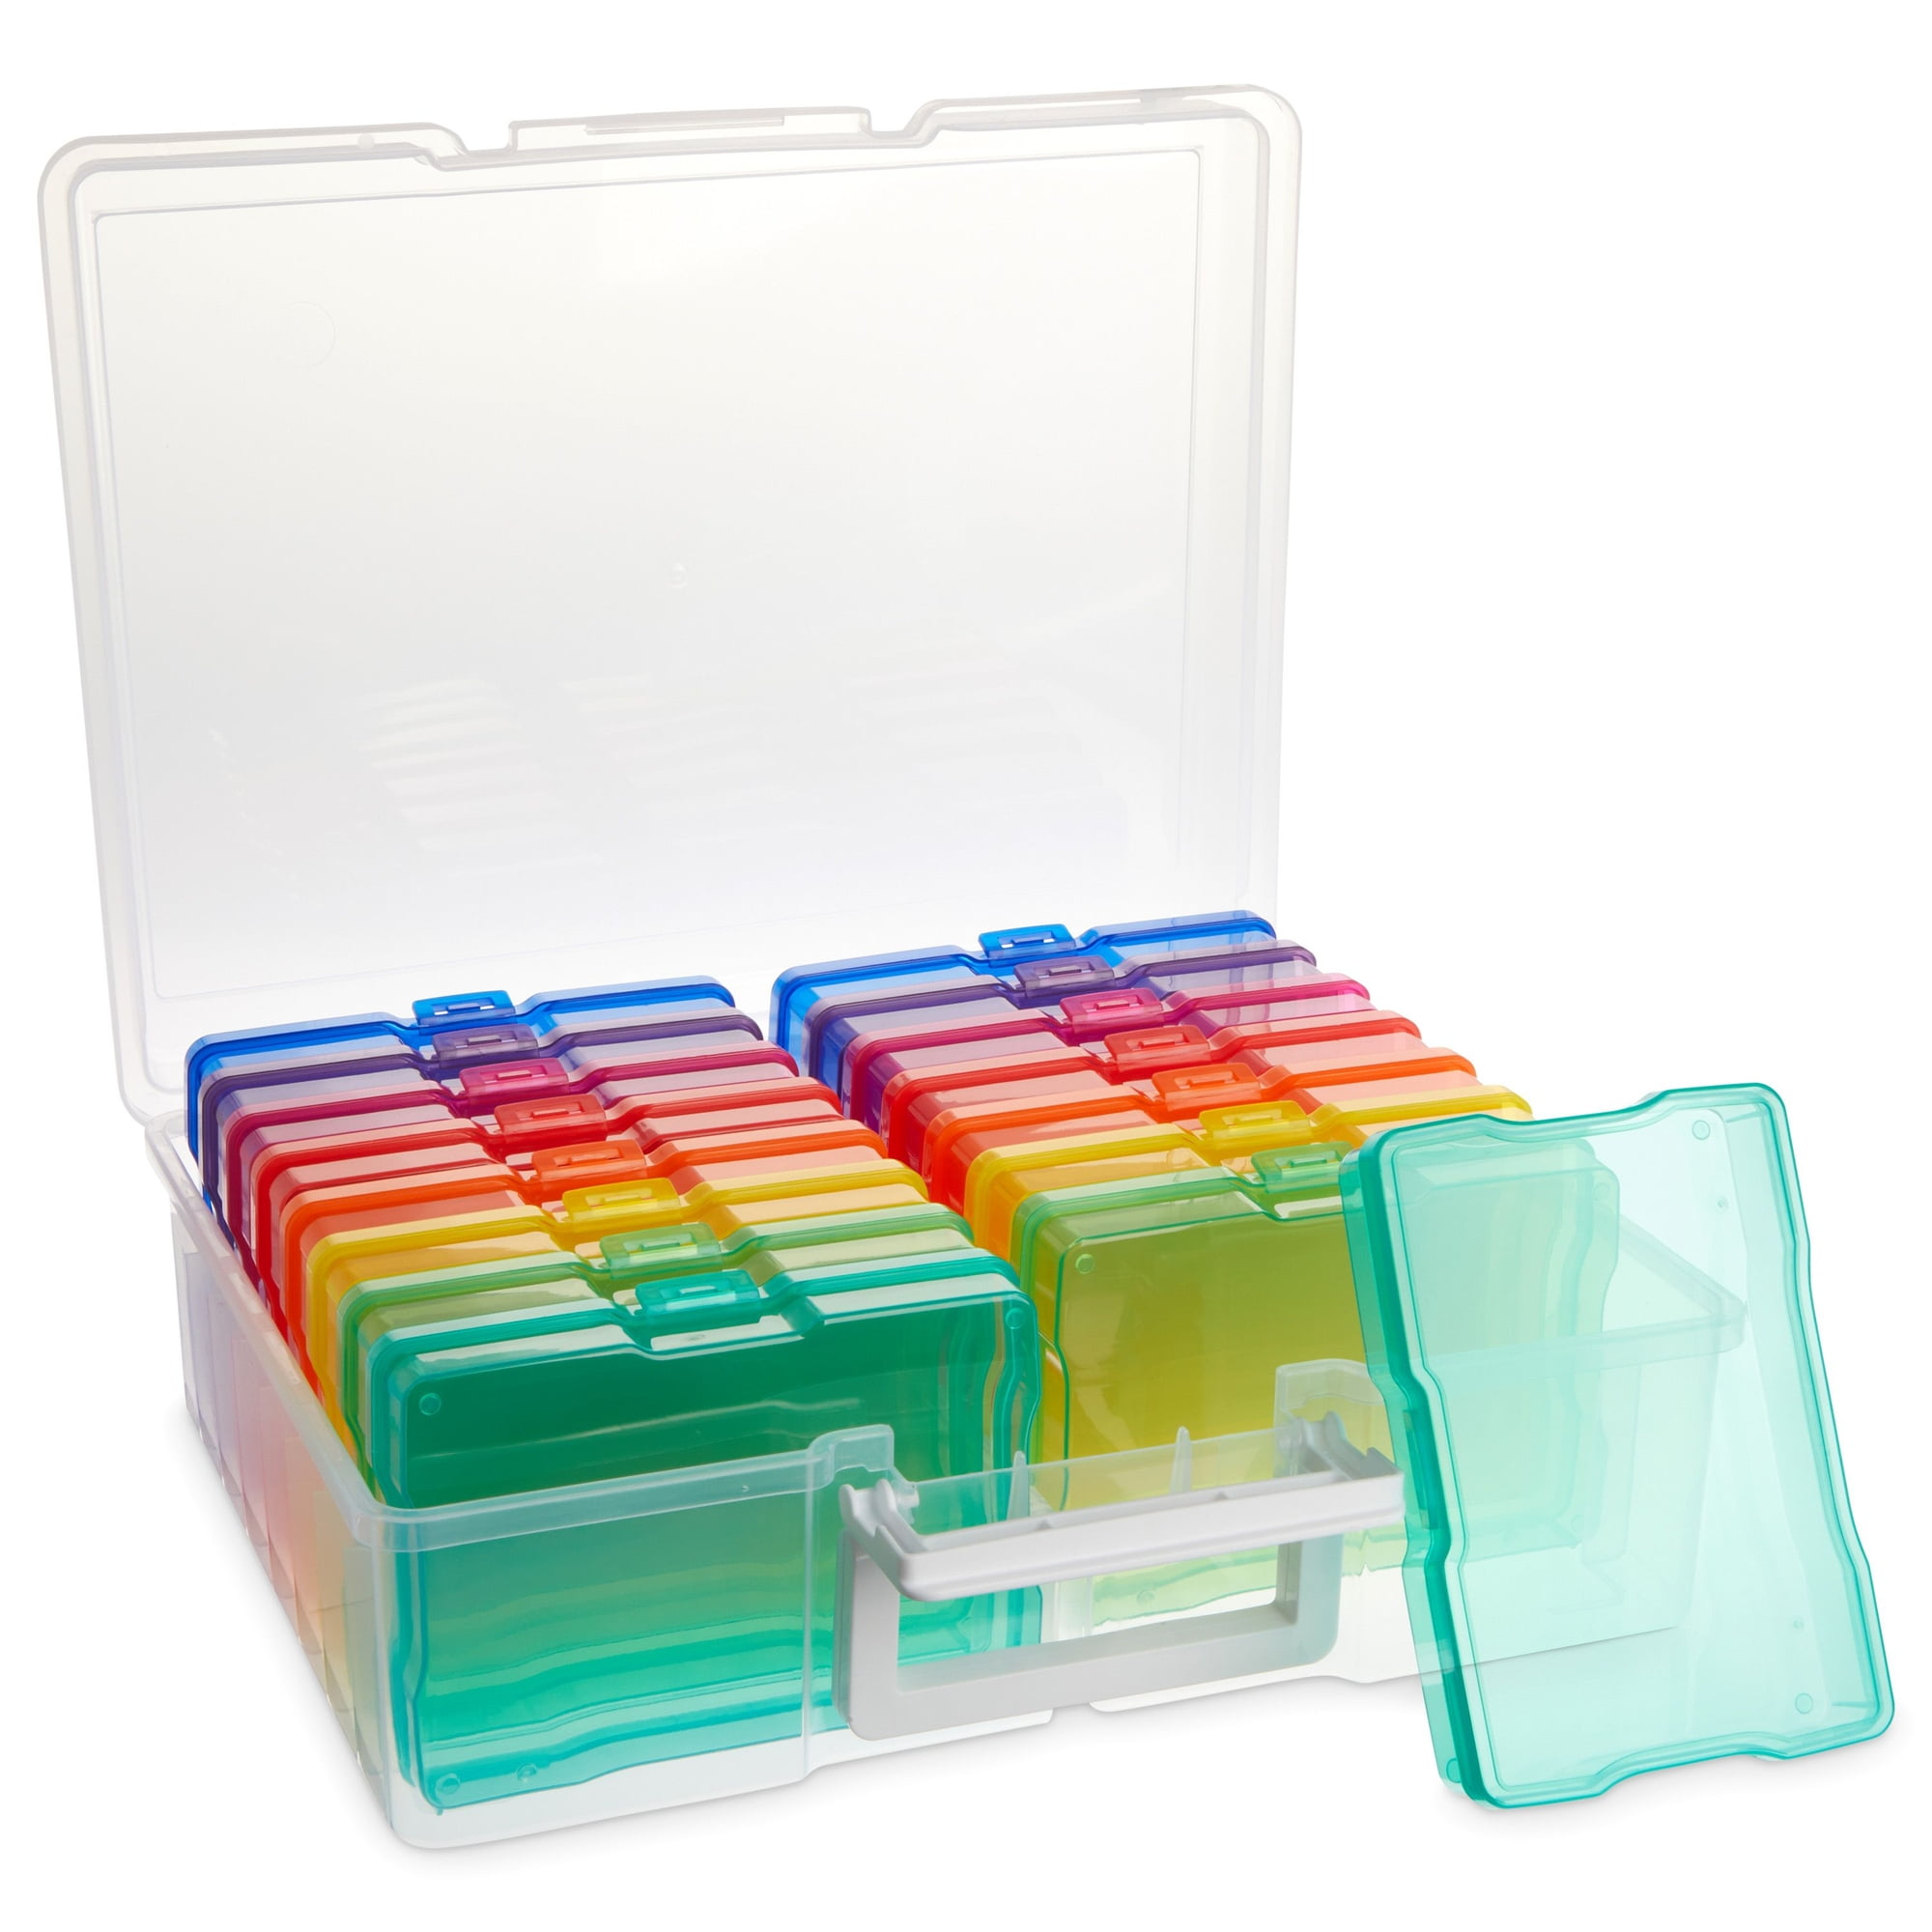 16 Transparent 4x6 Photo Storage Boxes and Organizer with